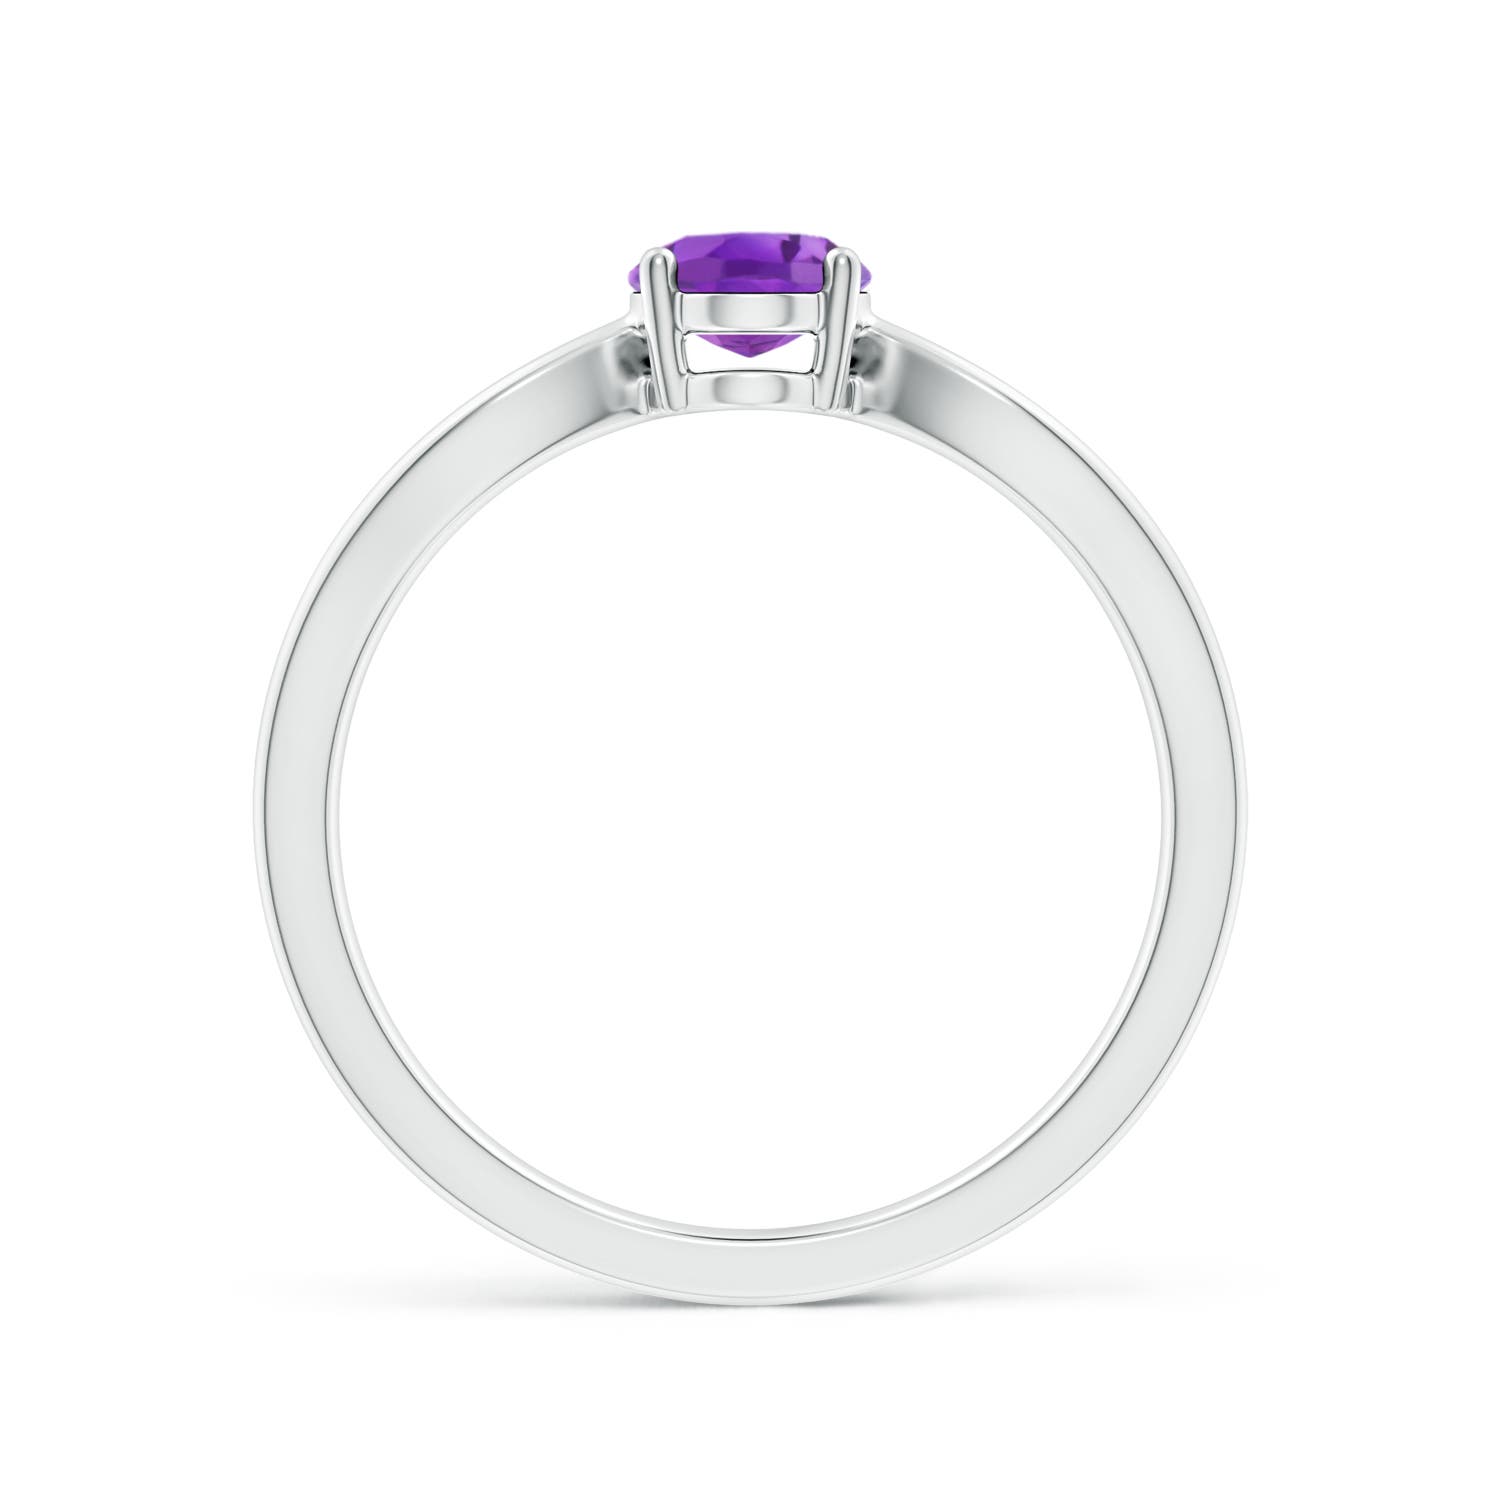 AA - Amethyst / 0.7 CT / 14 KT White Gold